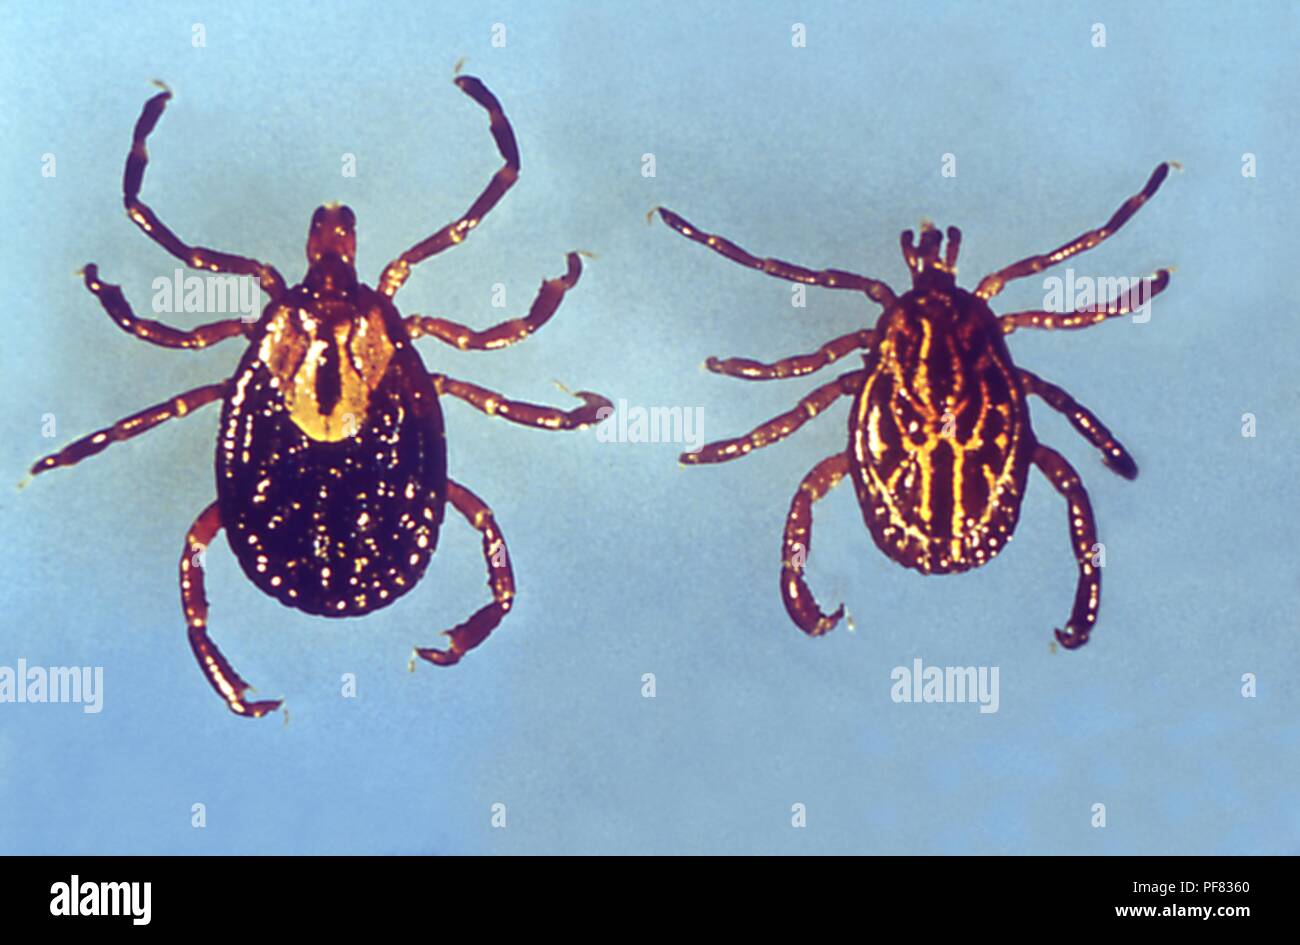 Two hard ticks (Amblyomma), carriers of the Lyme disease, 1975. Image courtesy Centers for Disease Control (CDC). () Stock Photo